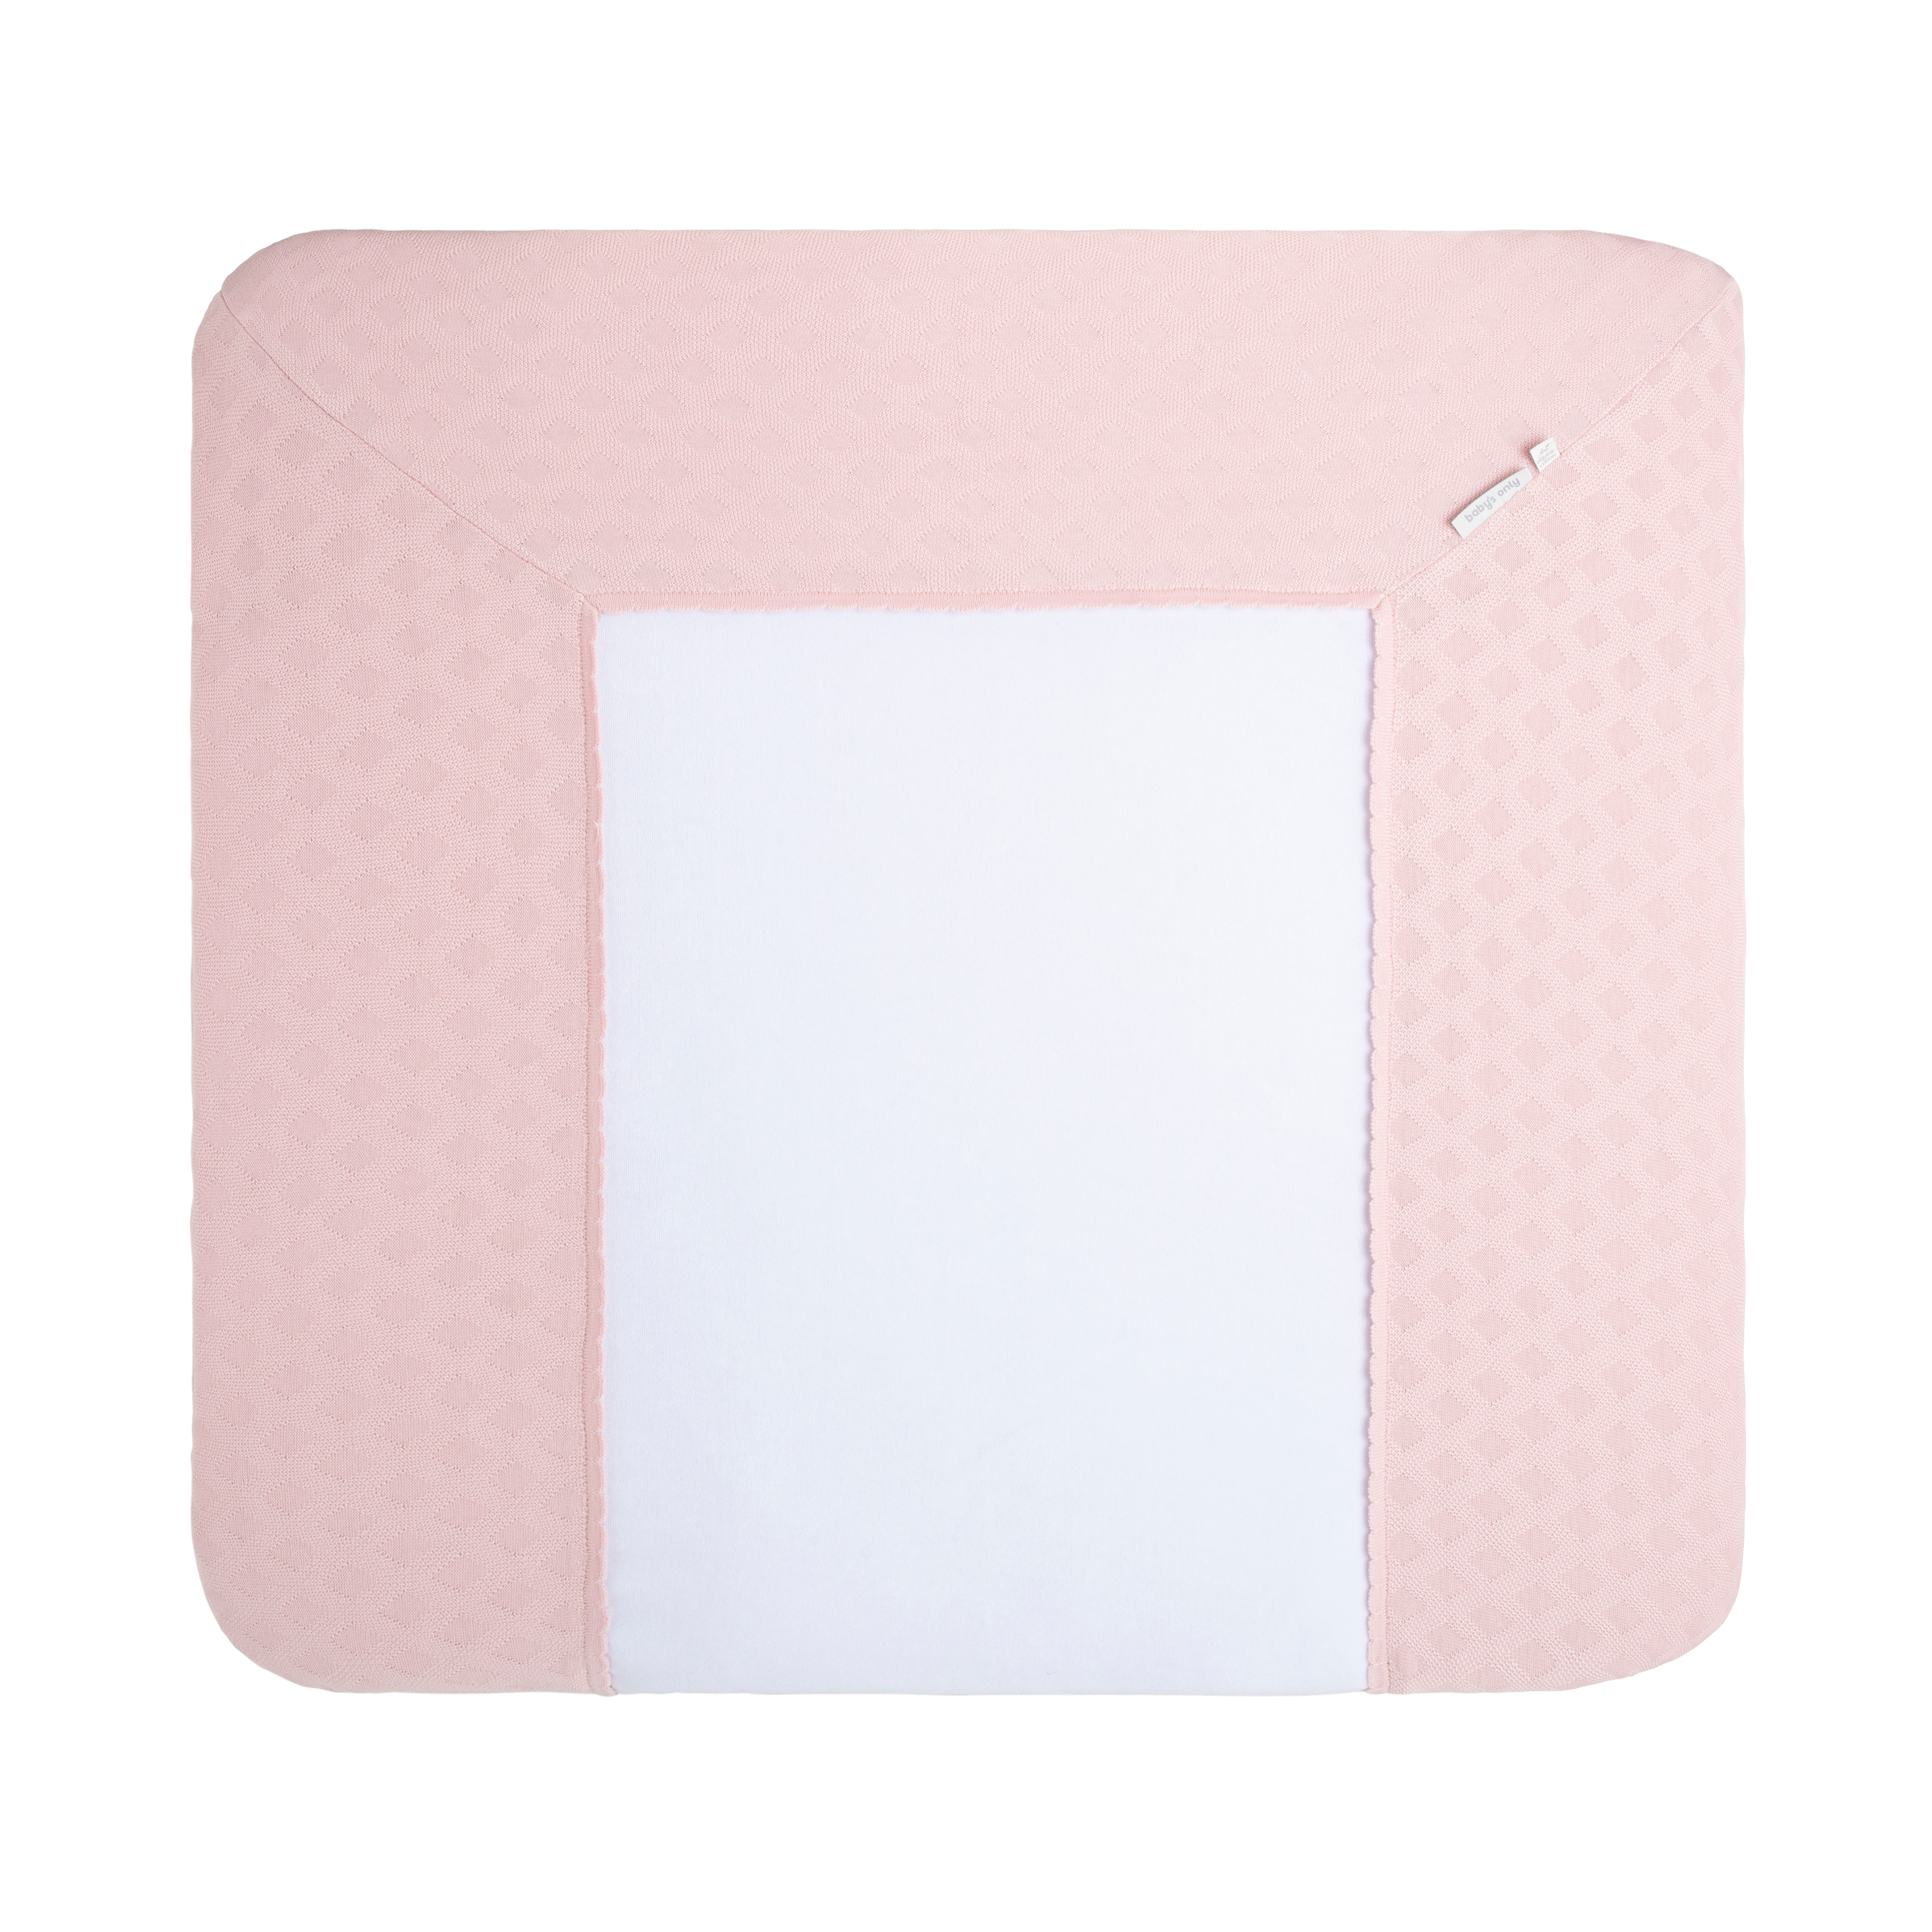 Changing pad cover Reef misty pink - 75x85